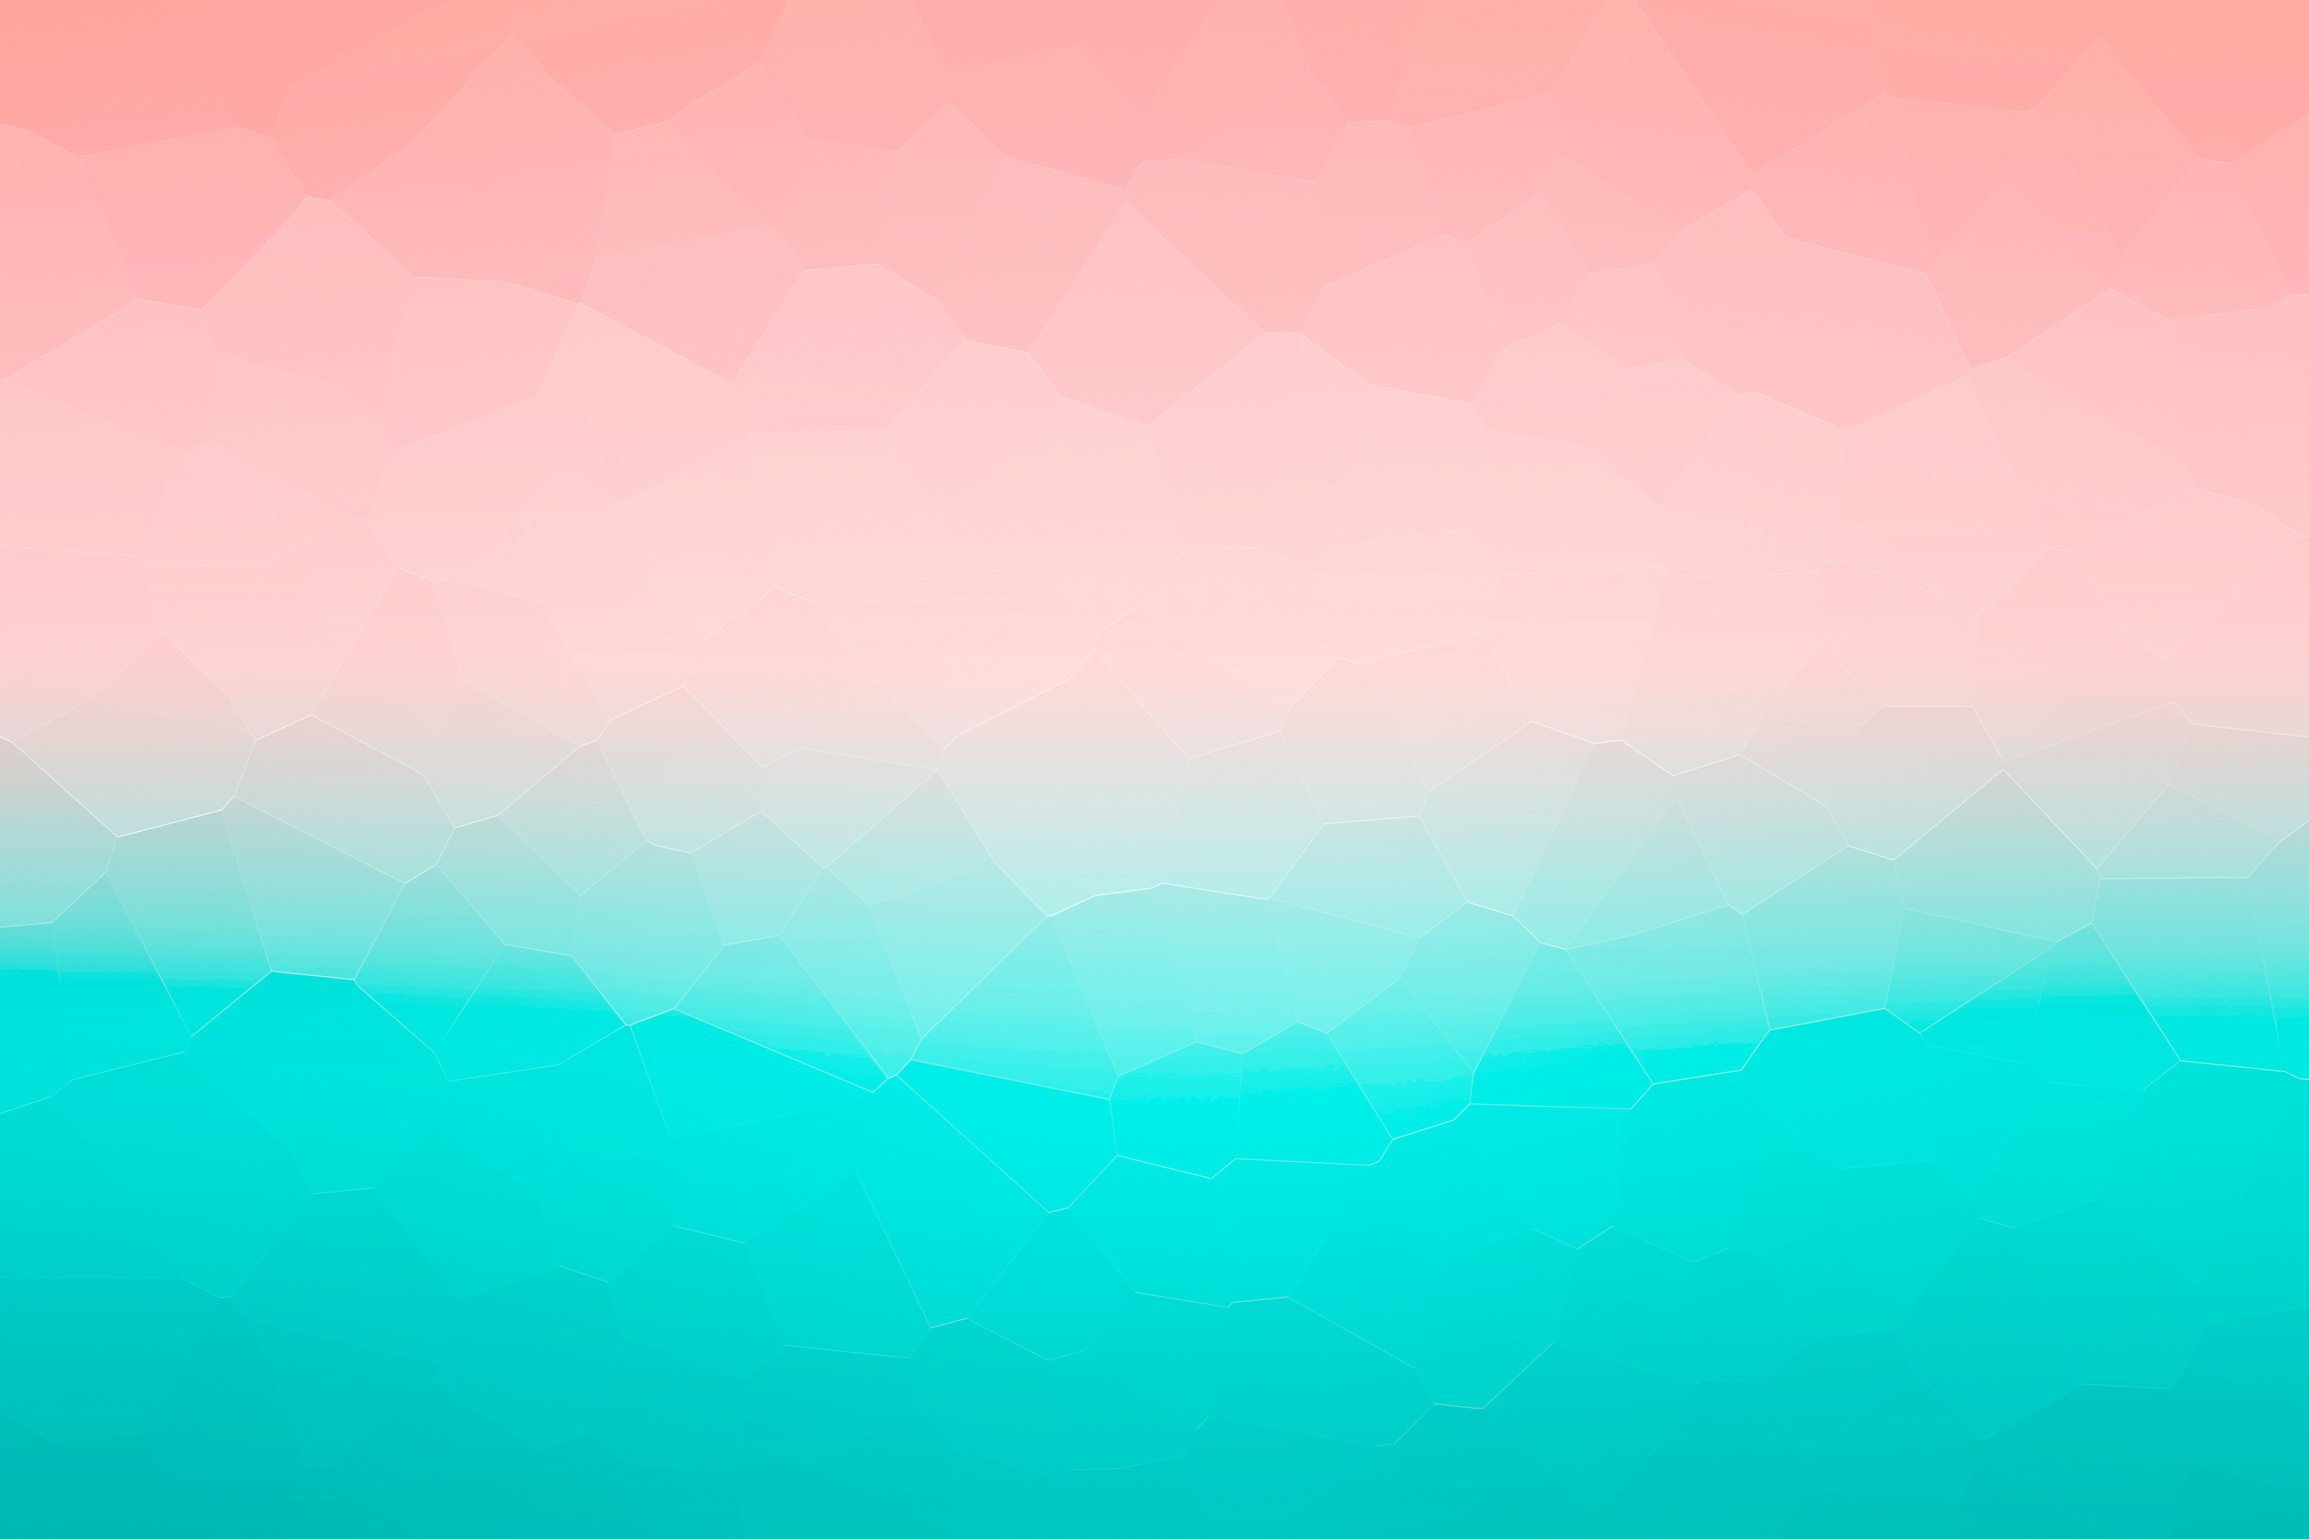 Abstract Defocused Polygonal Seascape Background in Pastel Pink and Teal